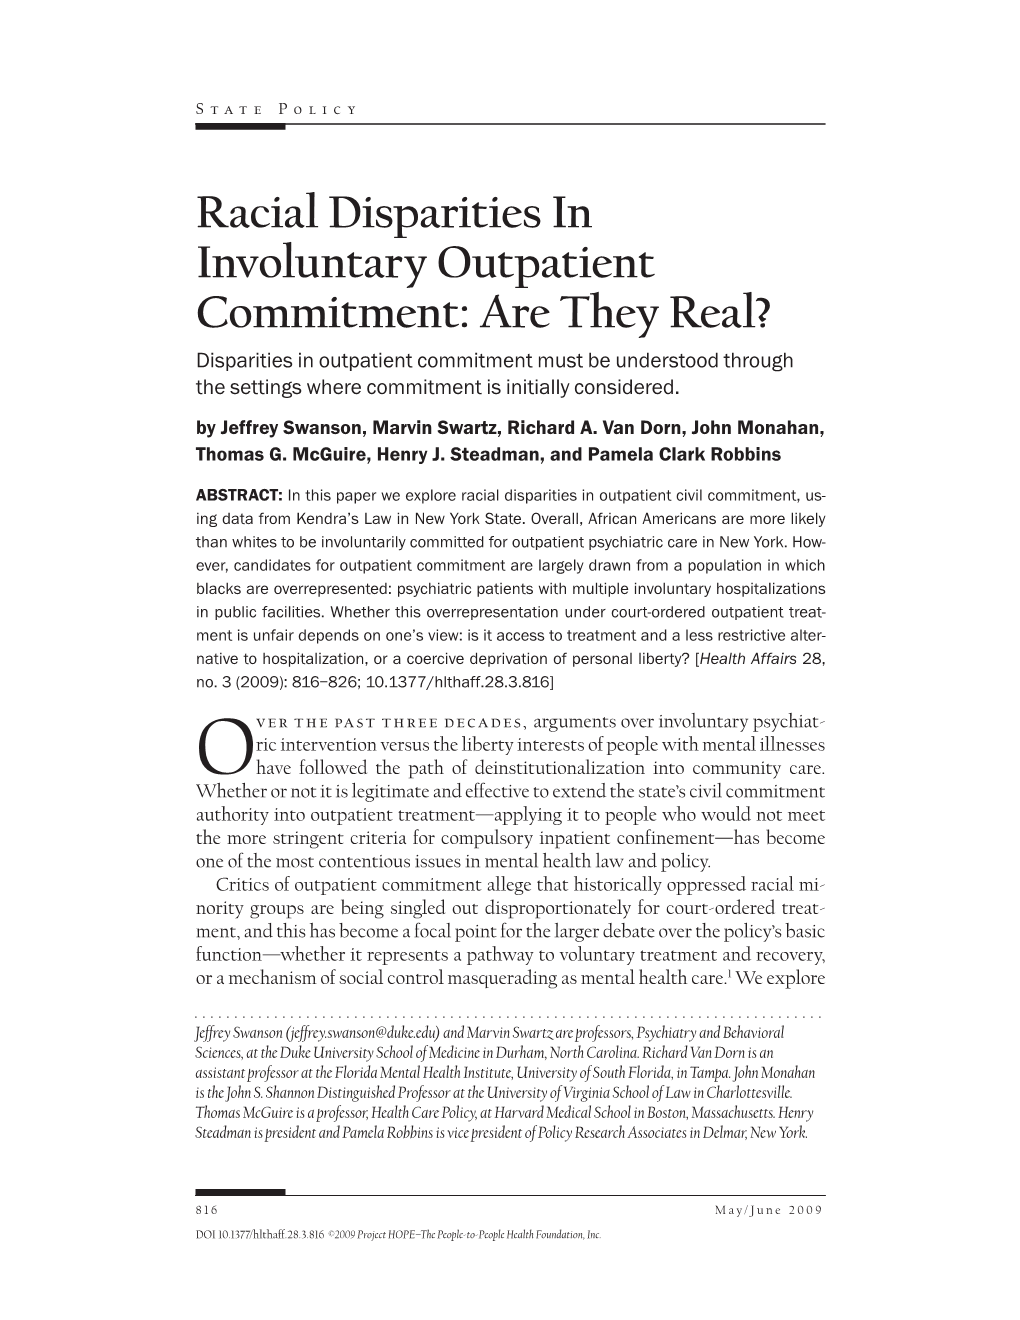 Racial Disparities in Involuntary Outpatient Commitment: Are They Real?